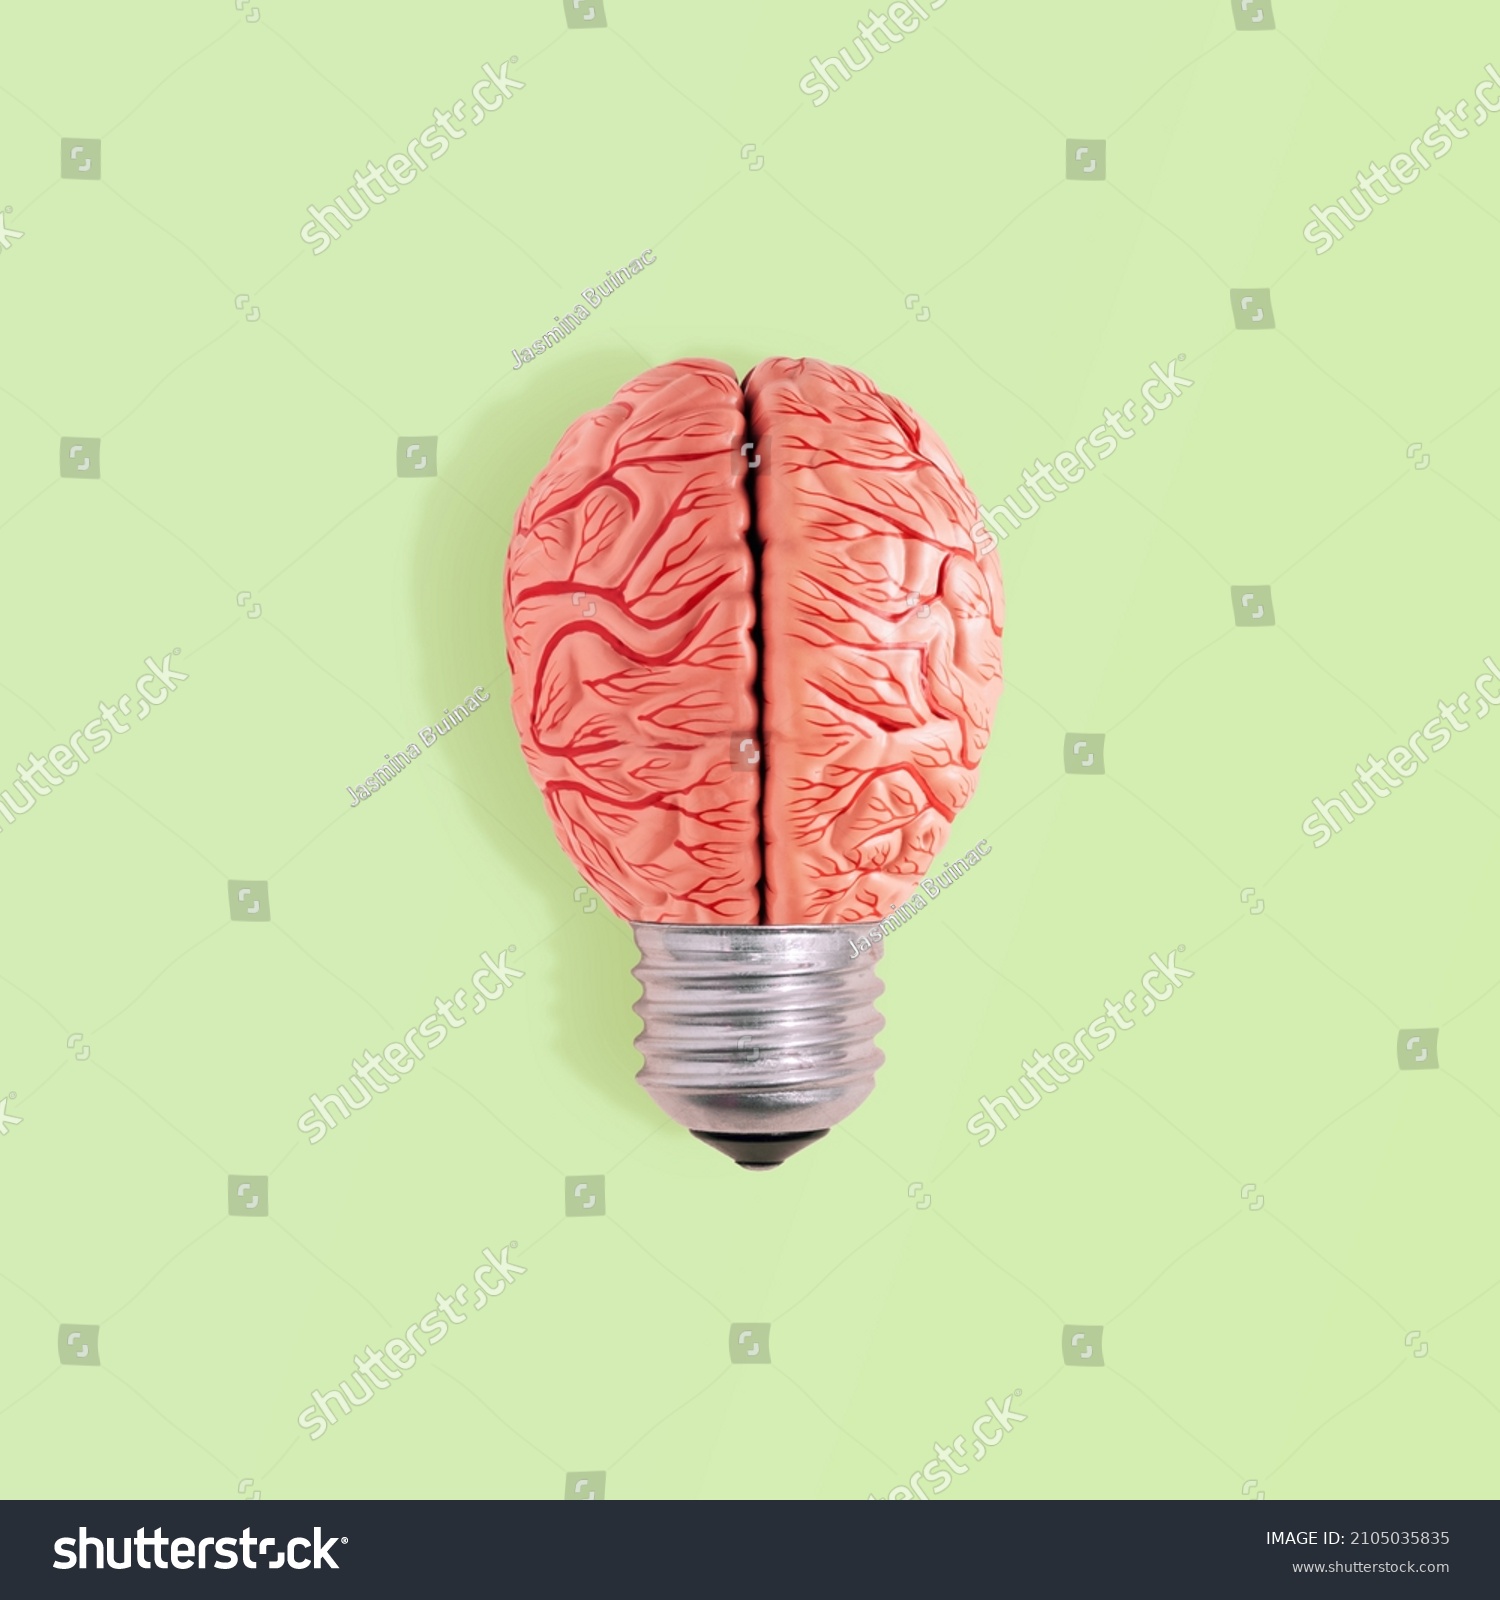 Abstract surreal conceptual wallpaper made with light bulb cap and model of human brain on isolated pastel green background. Brainstorming or knowledge icon. Minimal flat lay. Creative idea of lamp. #2105035835